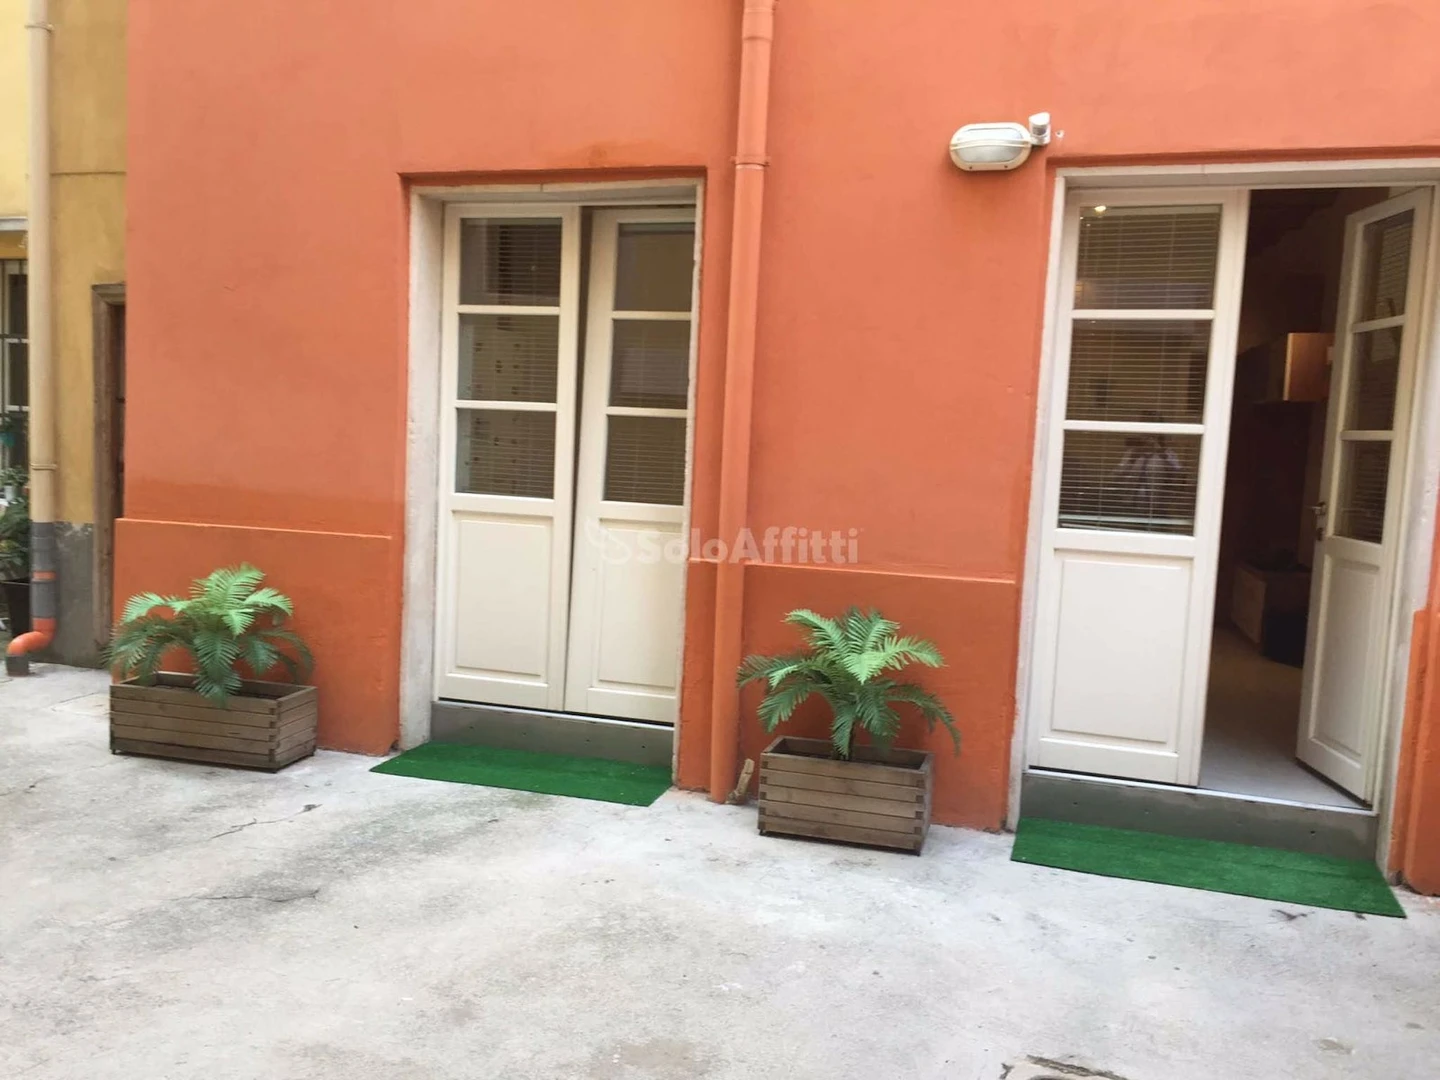 Accommodation with 3 bedrooms in Trieste